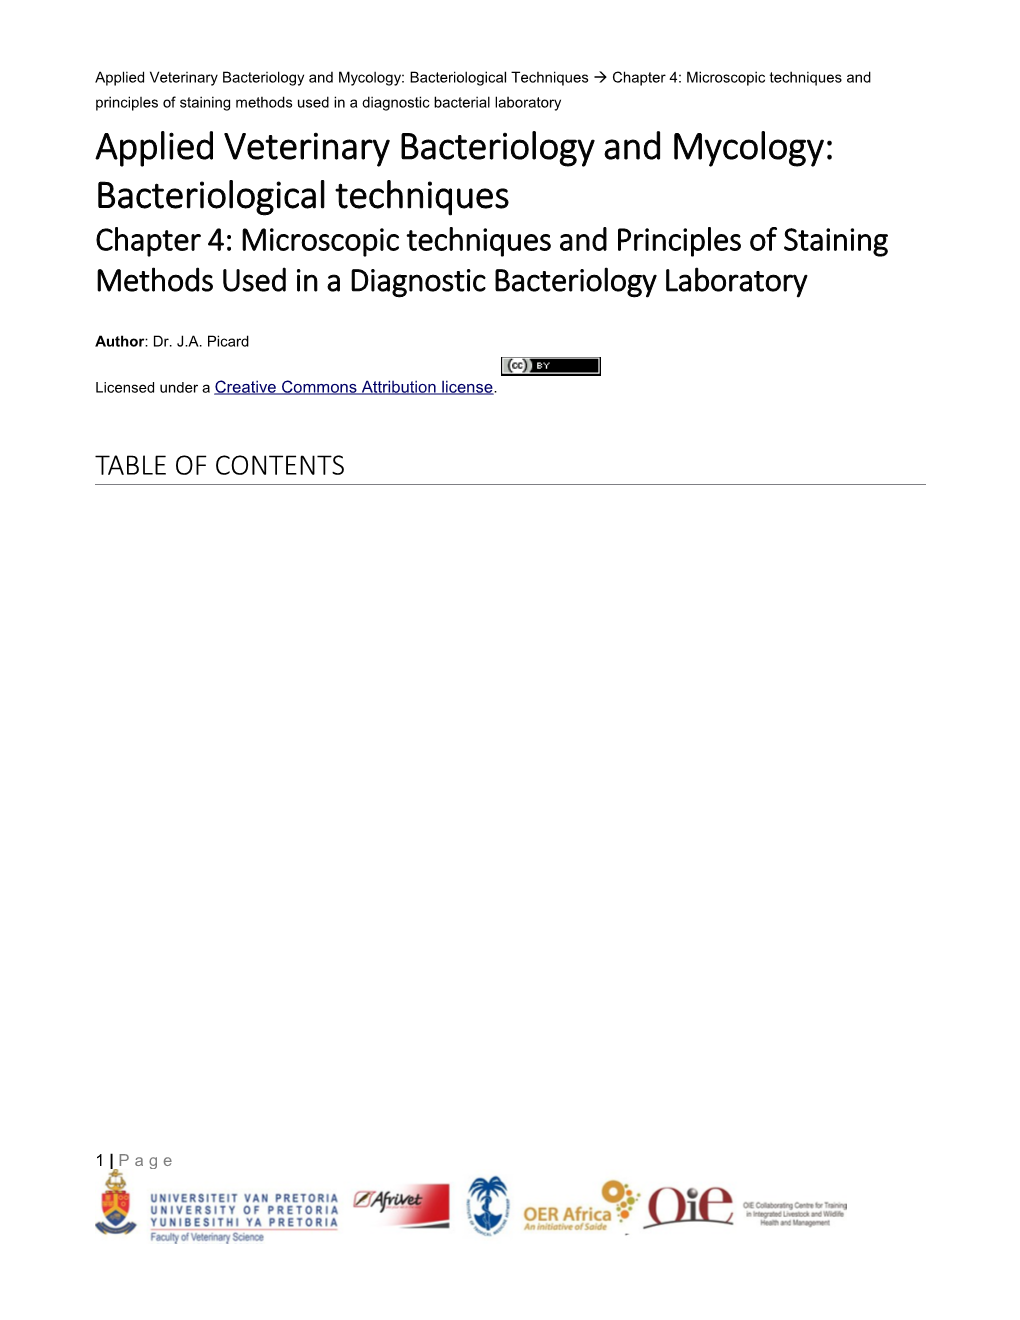 Chapter 4: Microscopic Techniques and Principles of Staining Methods Used in a Diagnostic